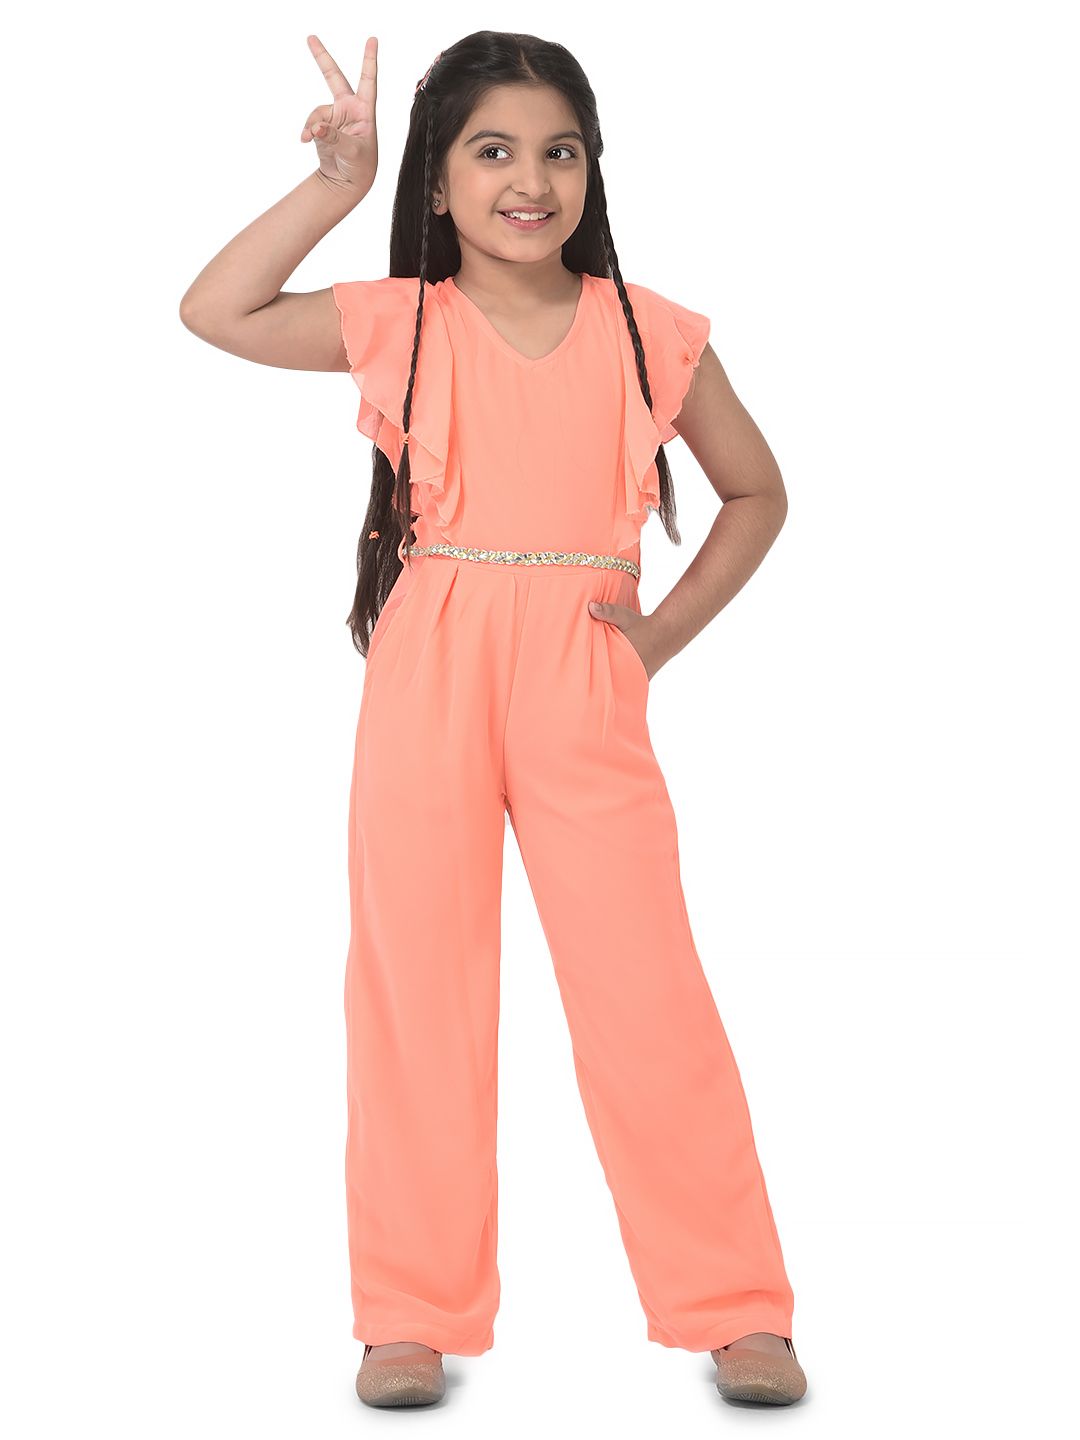 Display more than 183 jumpsuit for 13 year girl best